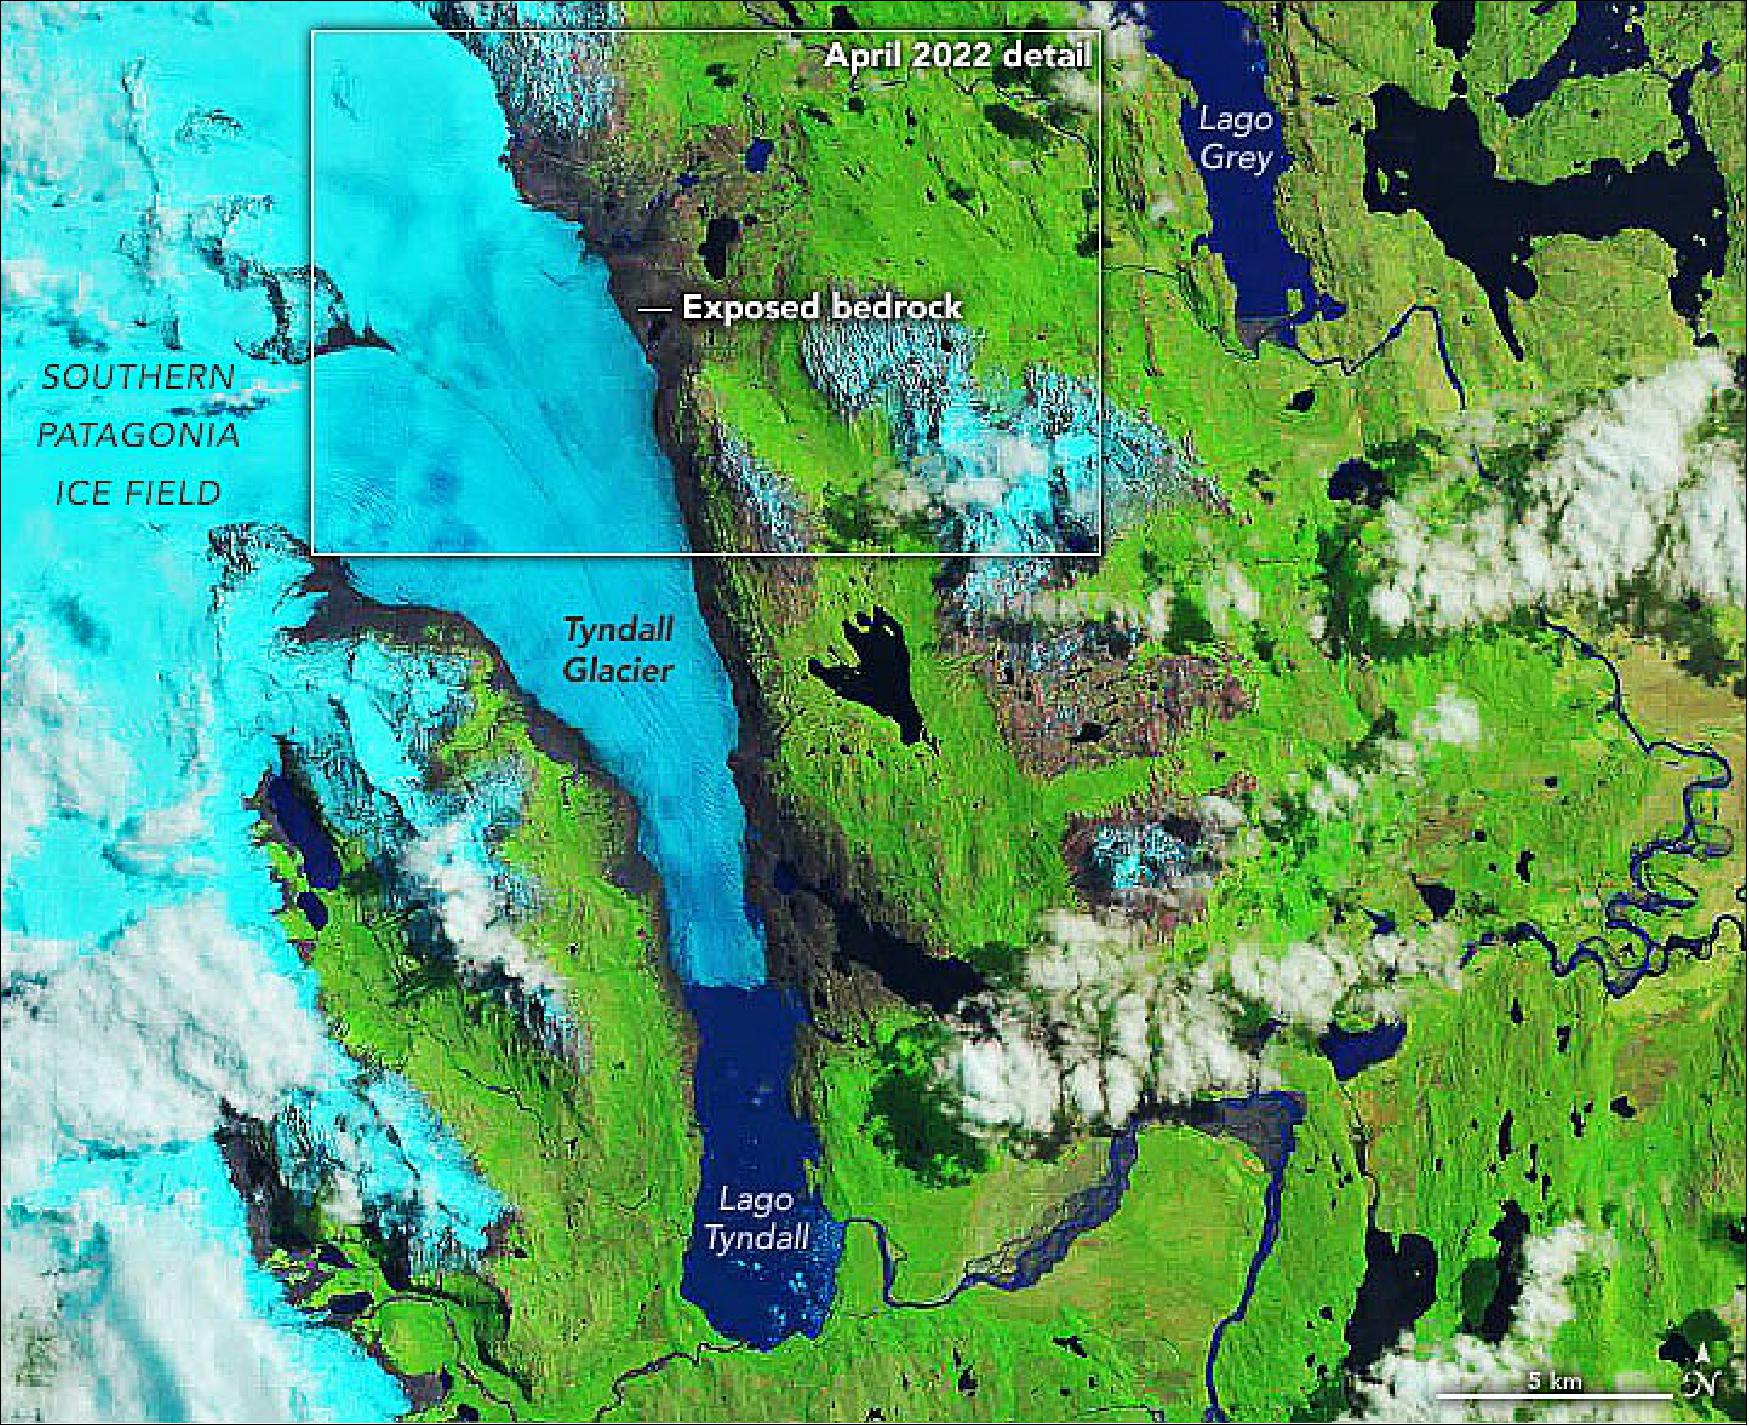 Figure 38: This image was acquired by the OLI instrument on Landsat-8. The false-color allows a better color match between the two images that were collected by different sensors (image credit: NASA Earth Observatory images by Joshua Stevens, using Landsat data from the U.S. Geological Survey. Photograph by Alejandra Zuñiga/Servicio Nacional del Patrimonio Cultural. Story by Kathryn Hansen)